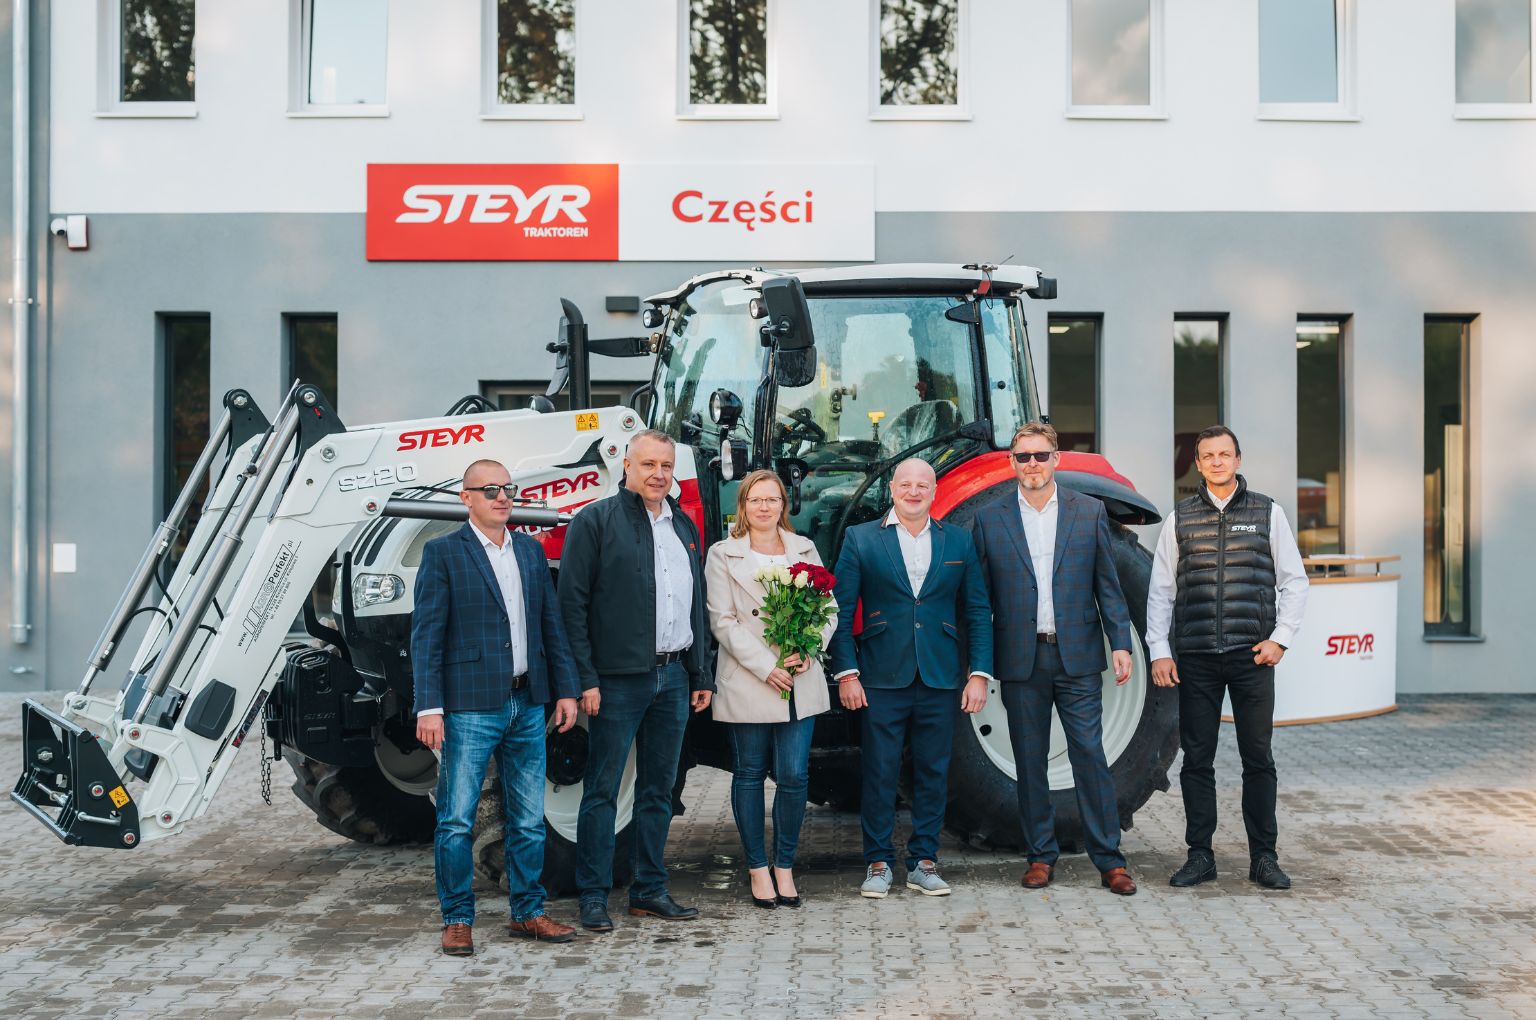 Steyr opens new dealership in Poland